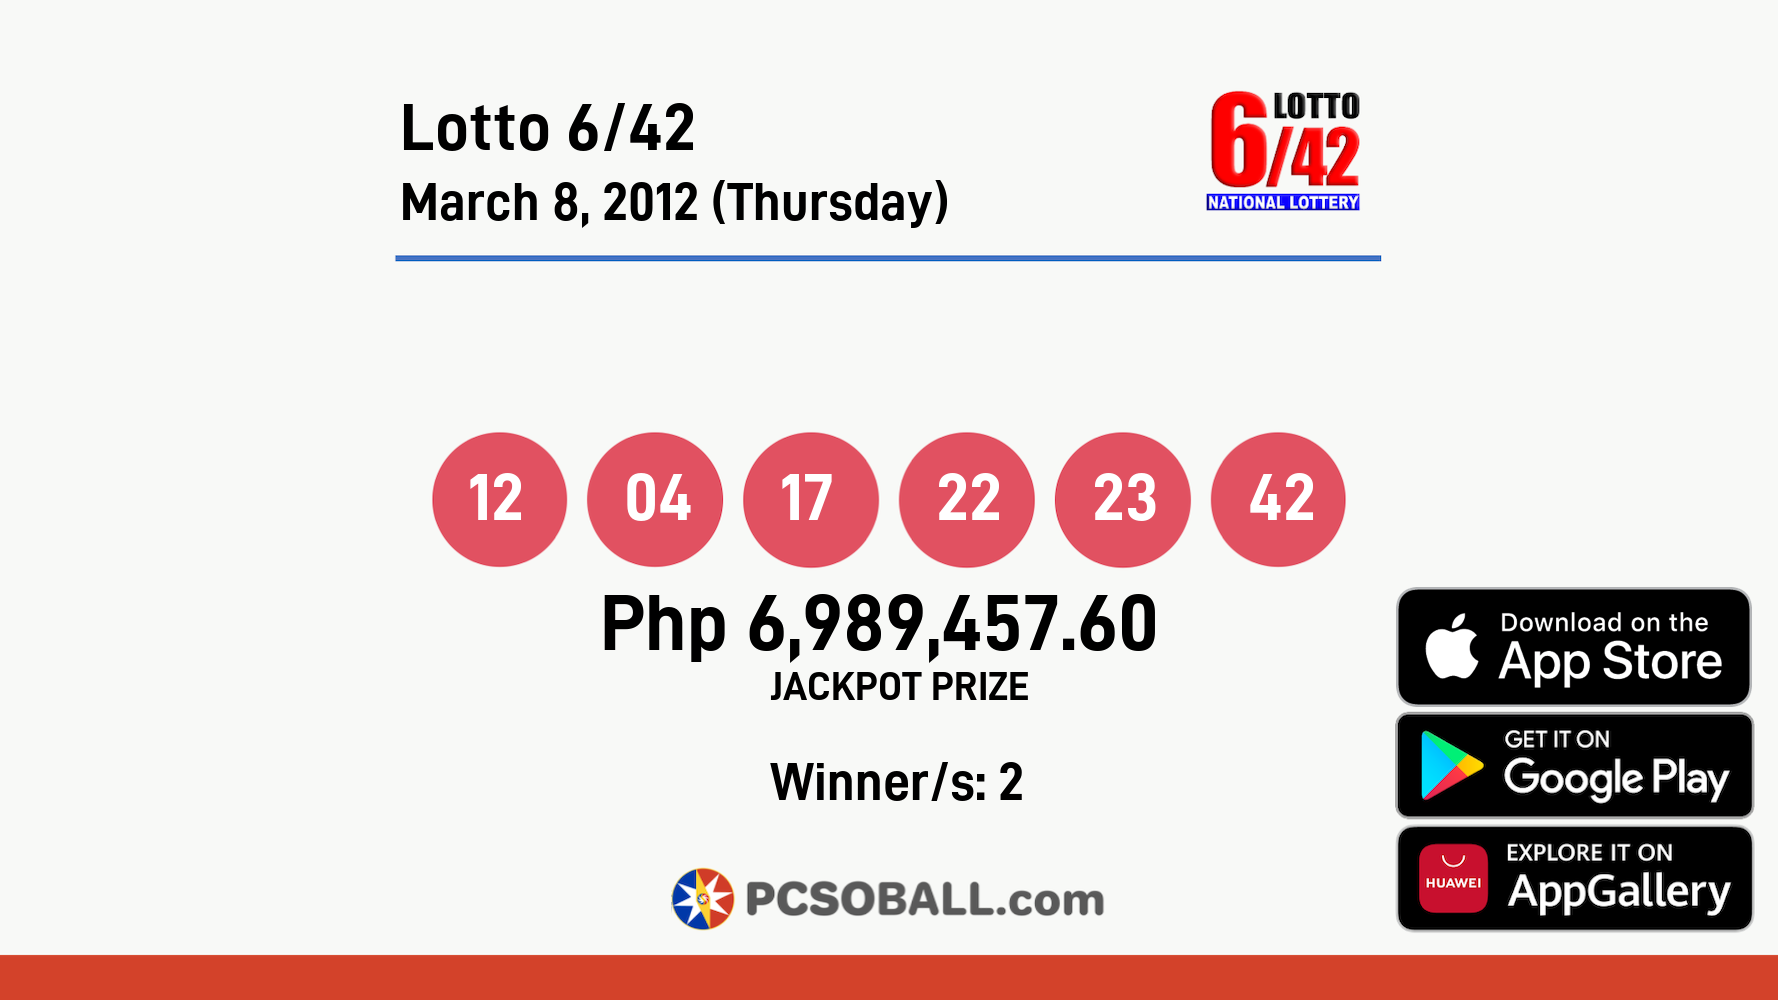 Lotto 6/42 March 8, 2012 (Thursday) Result